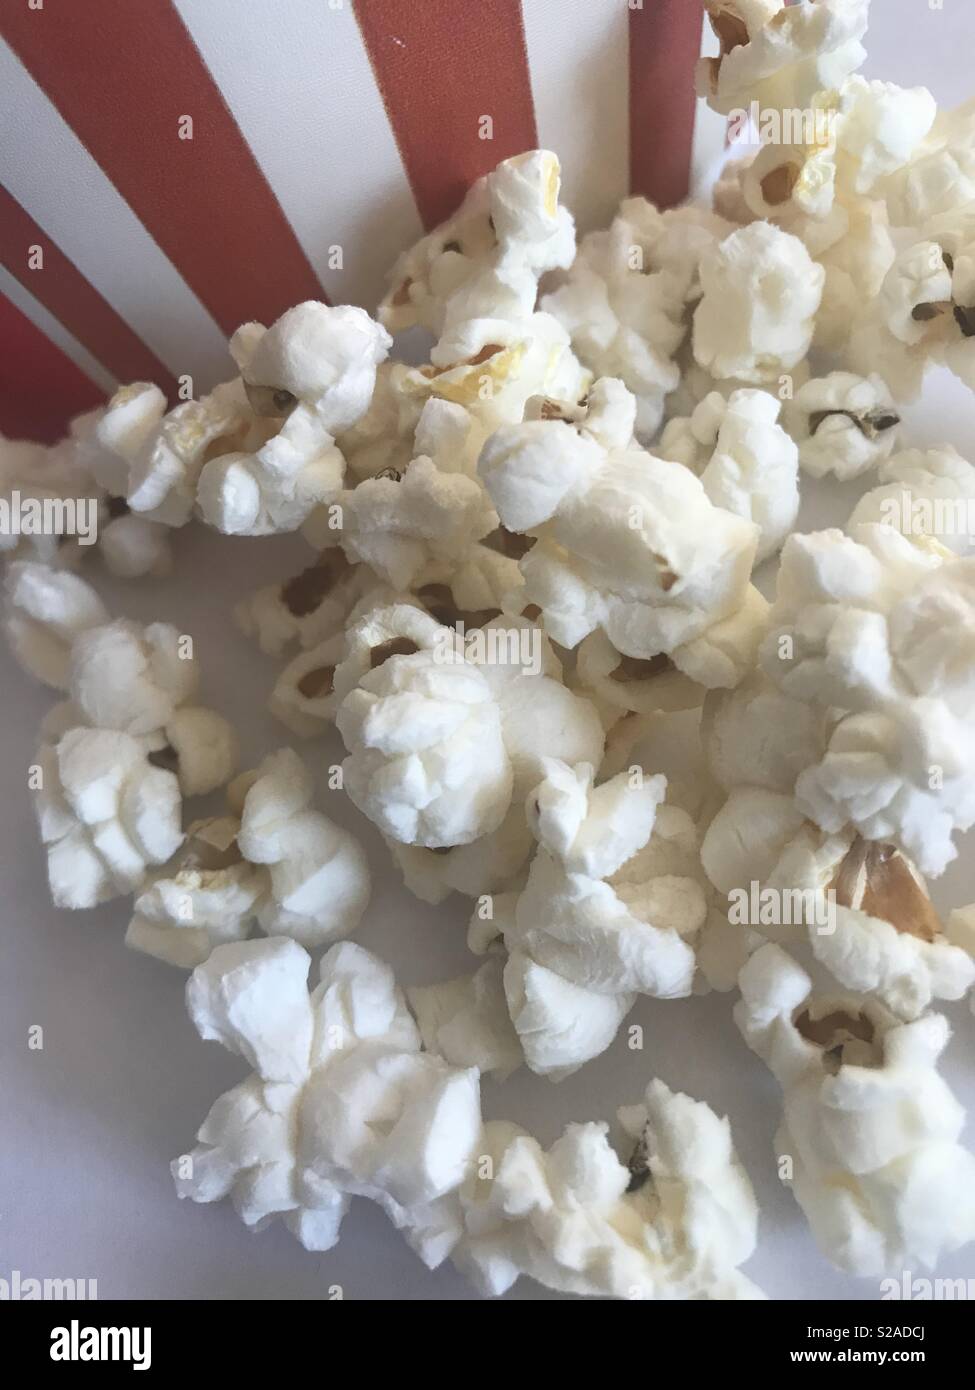 Let’s go to the movies a fun display of white fluffy popcorn sitting in front of a red and white striped bucket Stock Photo